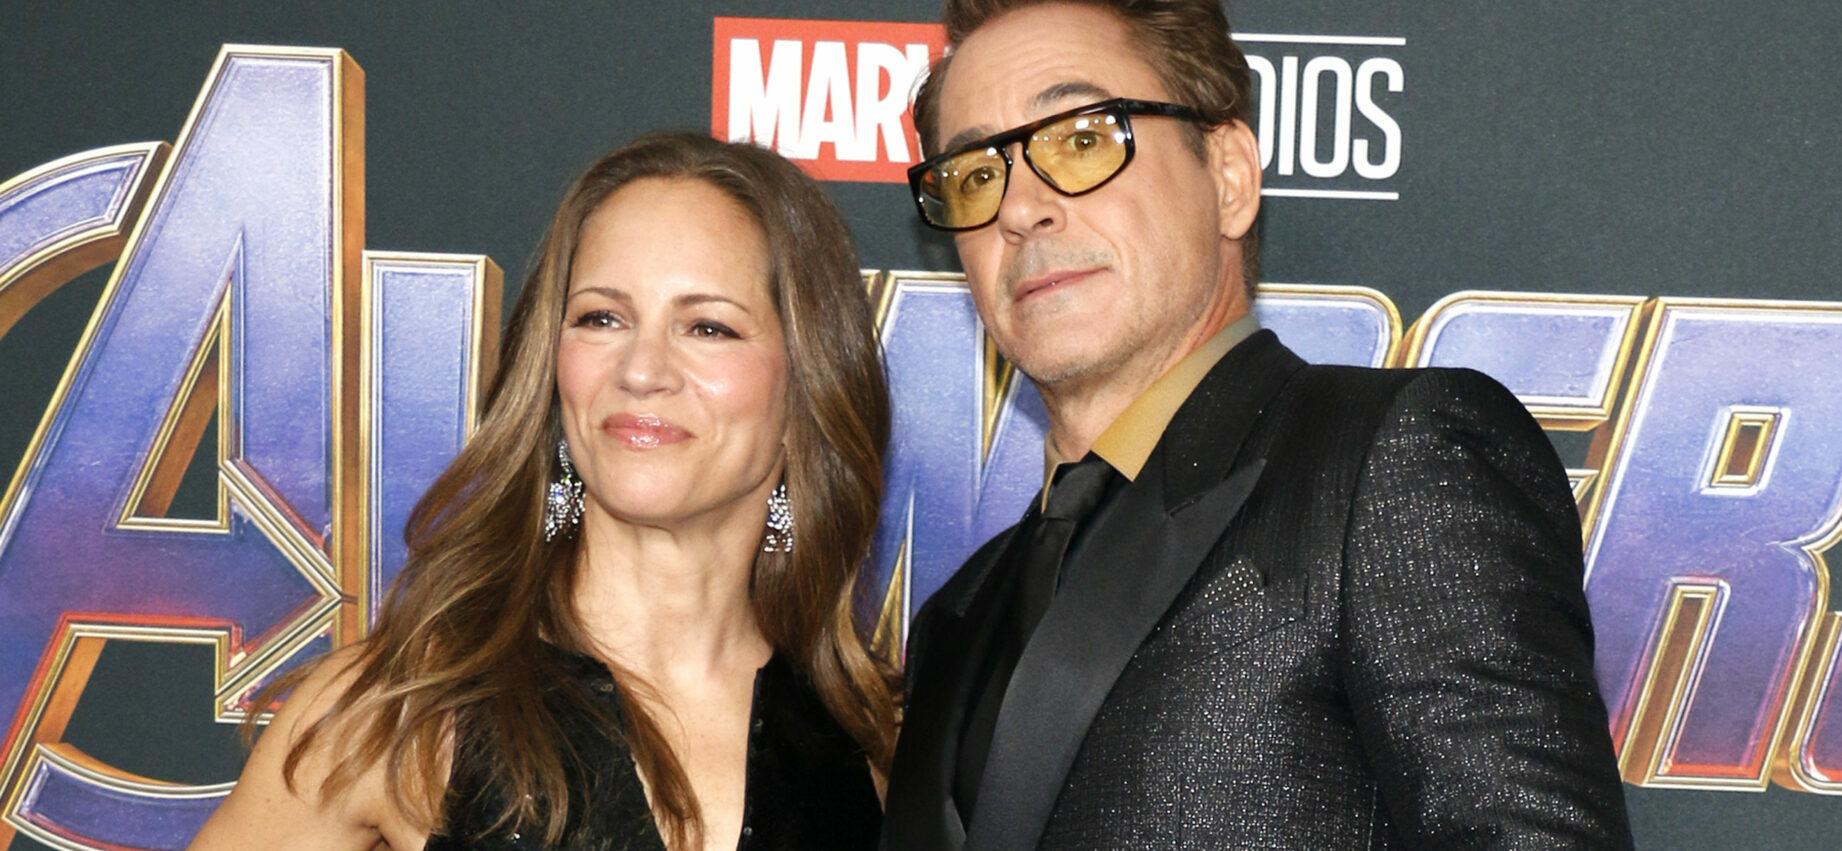 Robert Downey Jr. Sued For Alleged 'Elder Abuse' Over New Podcast Series